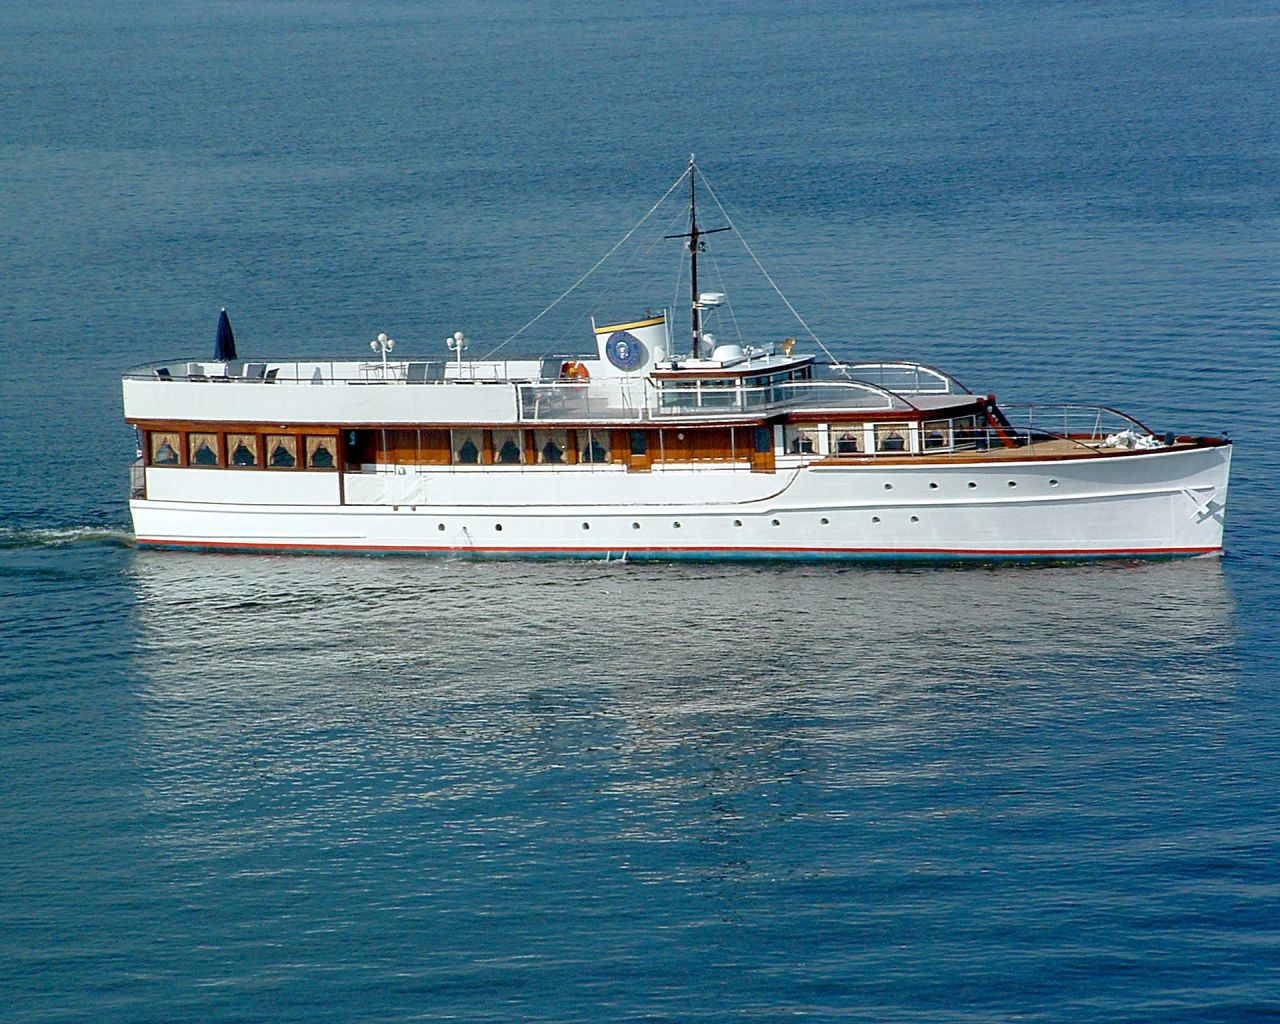 If only the Honey Fitz could talk, the stories this presidential yacht could tell. Built over 80 years ago, the pretty wooden boat has served five U.S. presidents and after a recent makeover is now available for hire by the public.